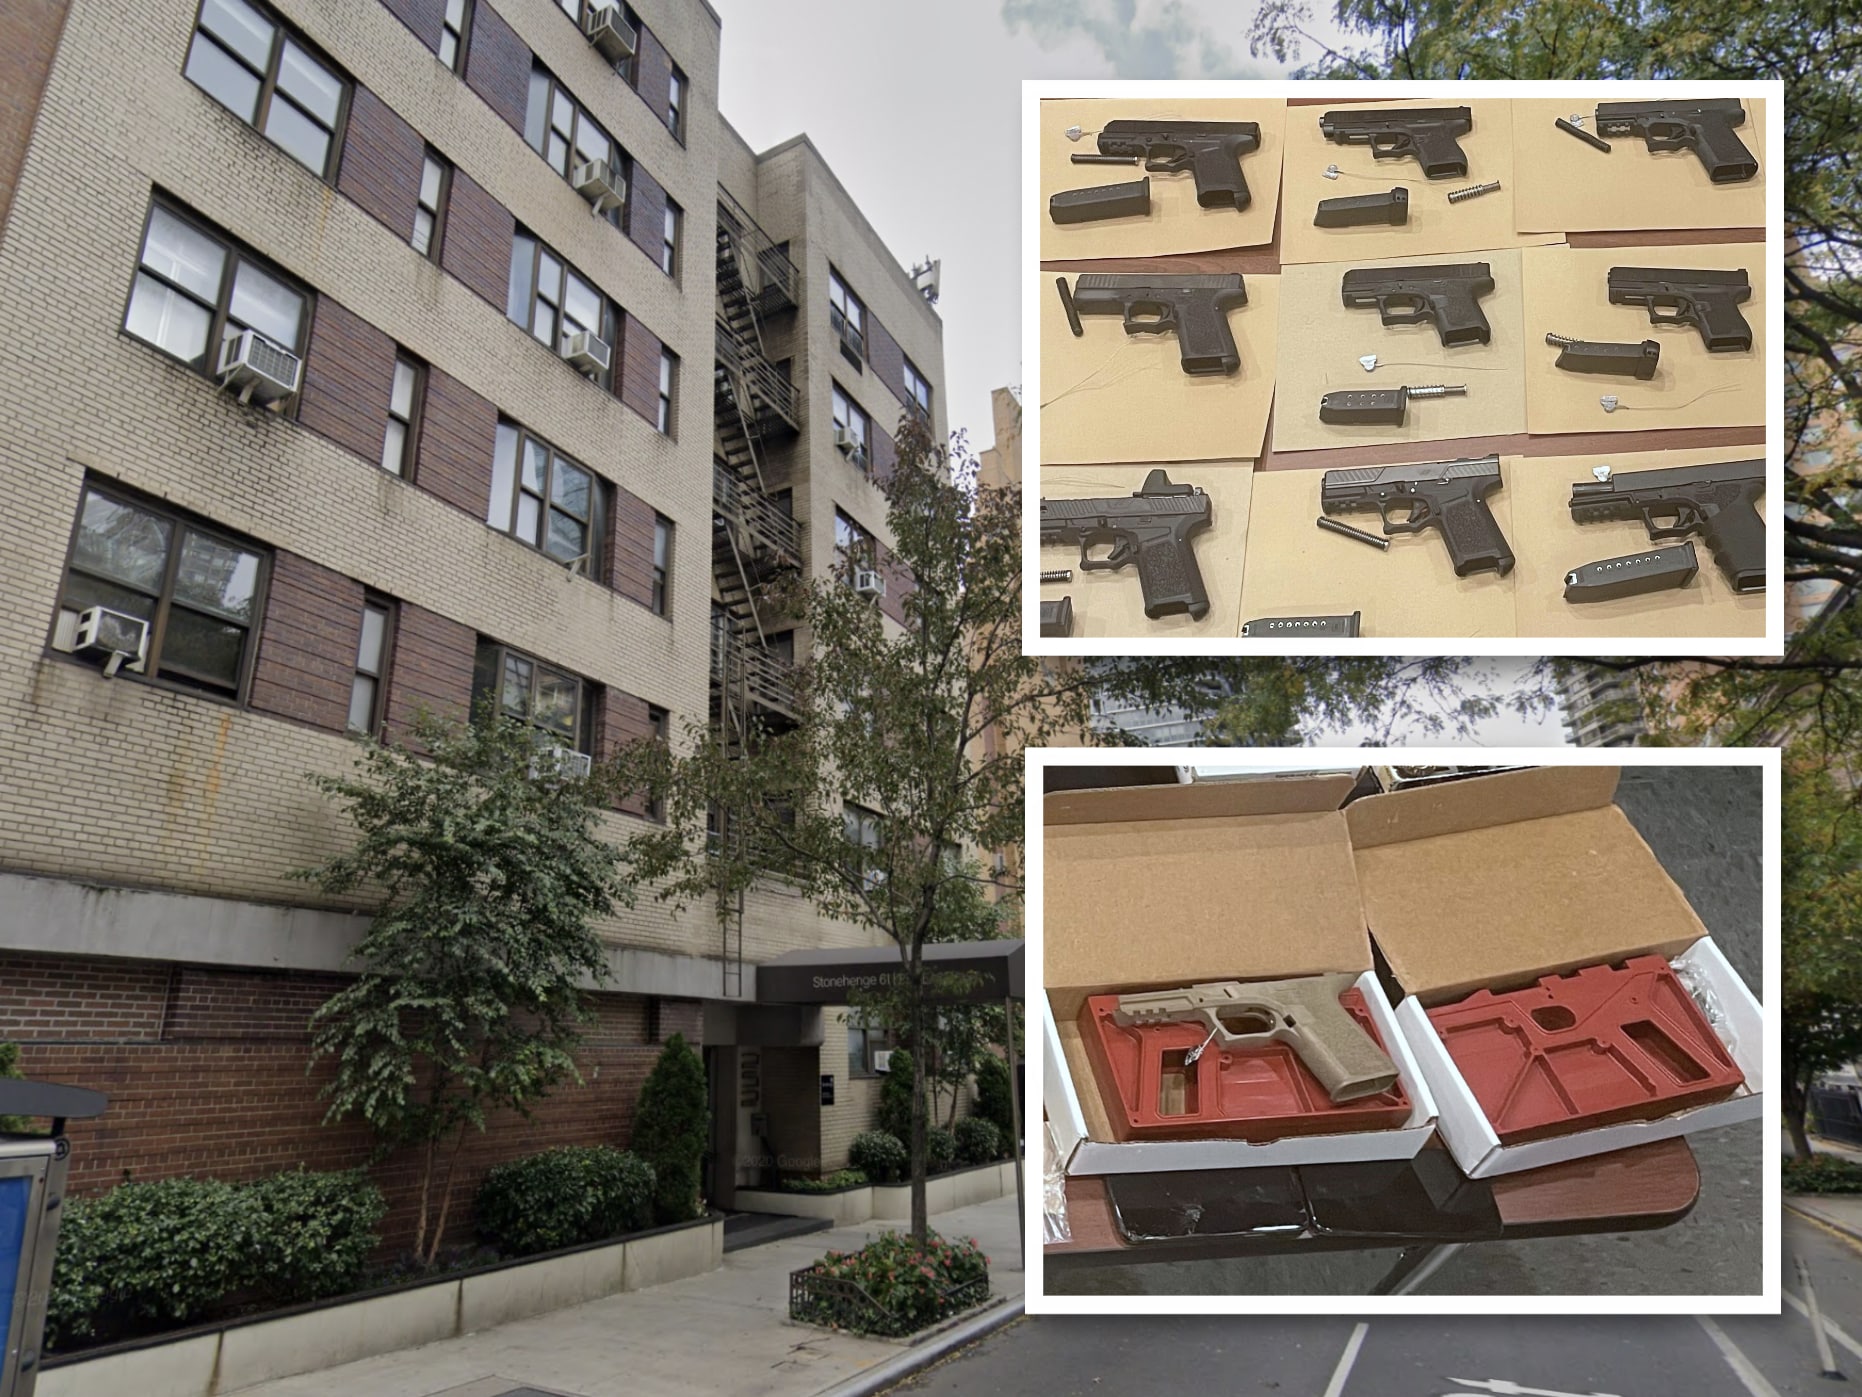 ‘Ghost gun’ factory found in pharma CEO’s Upper East Side apartment, prosecutors say | Google, Linked In, Manhattan District Attorney's Office